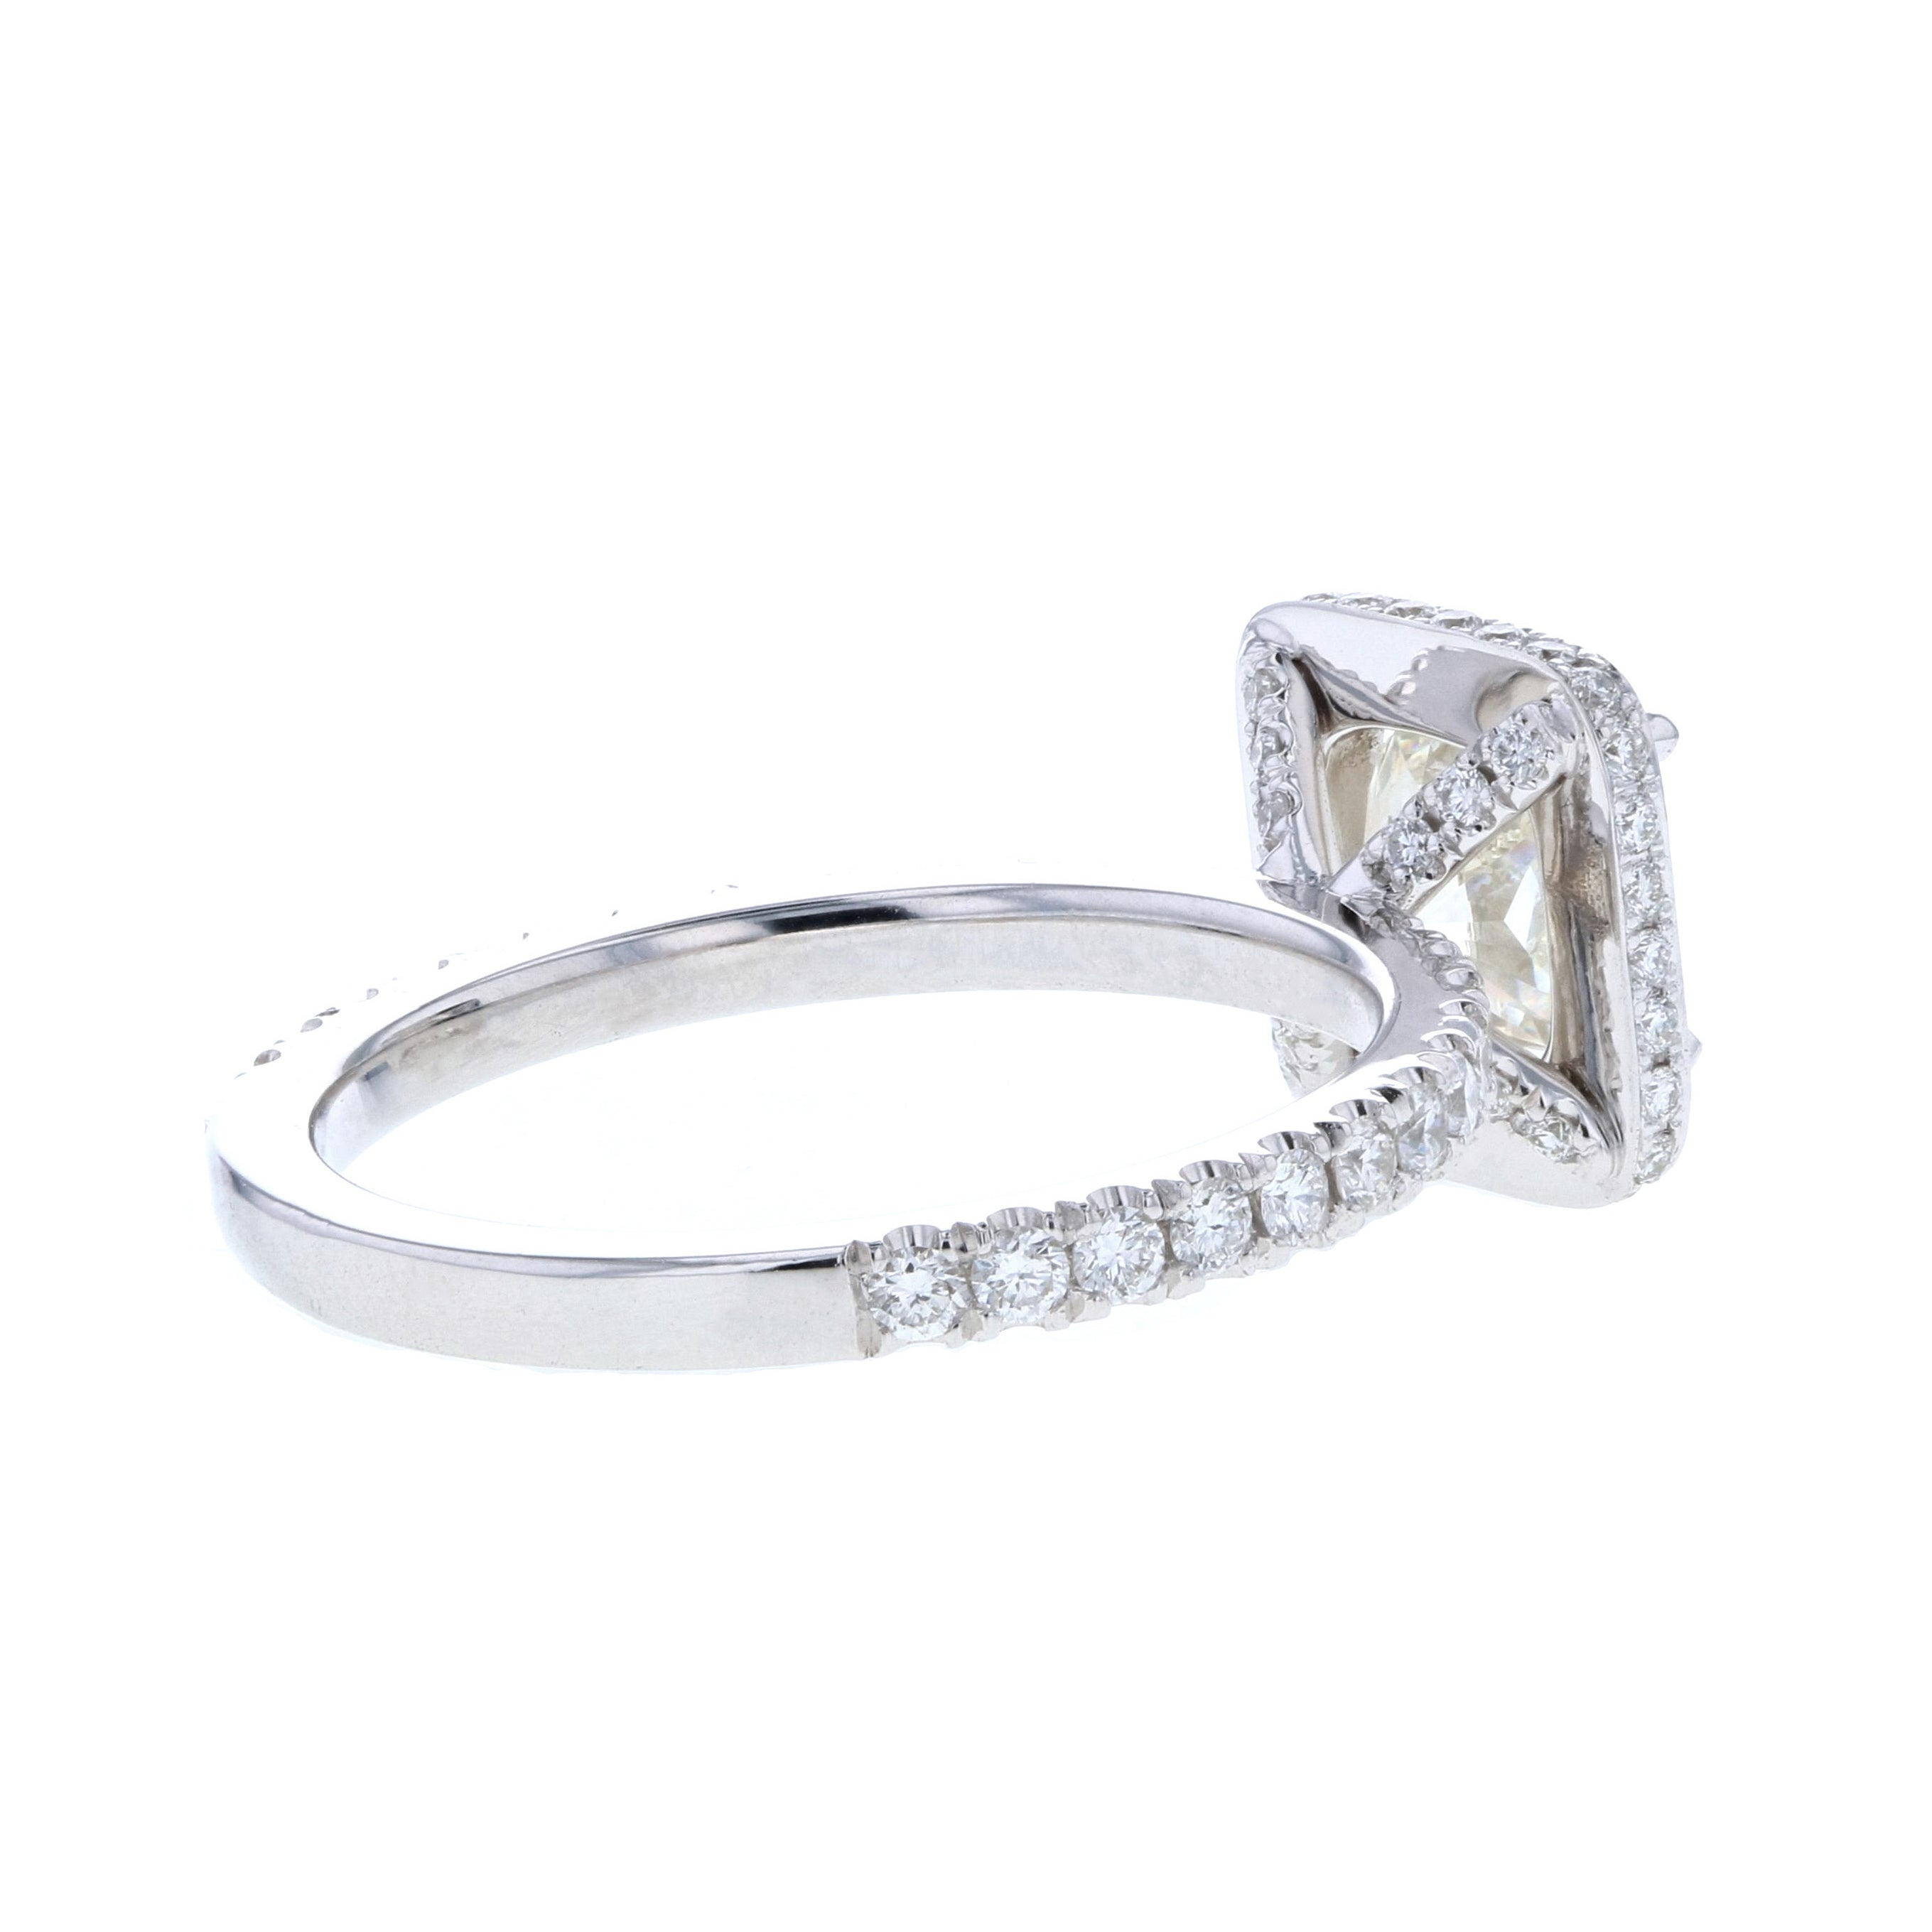 Cushion Cut Diamond Engagement Ring with Hidden Diamond Halo and Pave